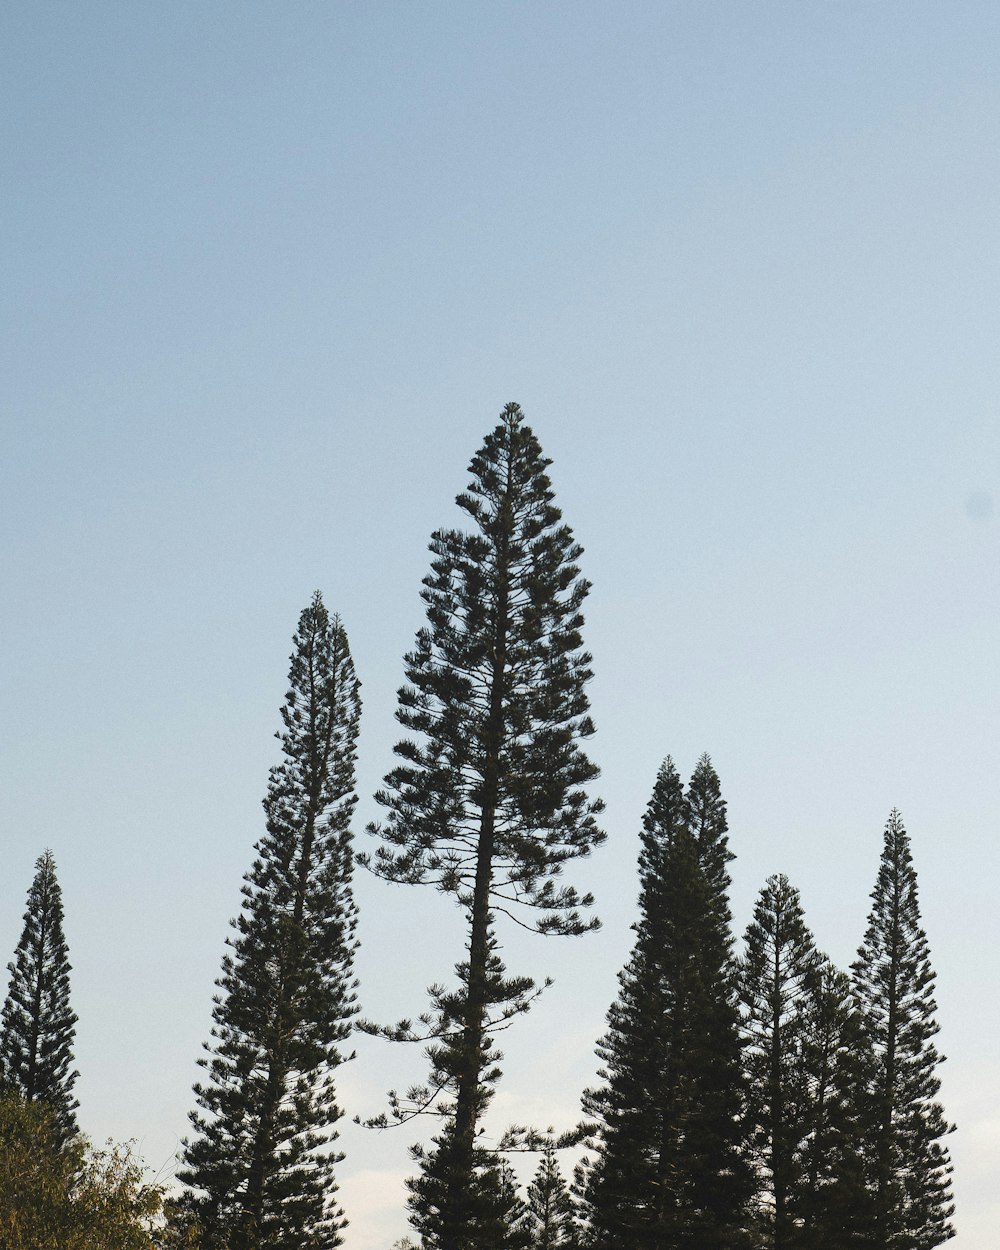 a group of tall trees standing next to each other